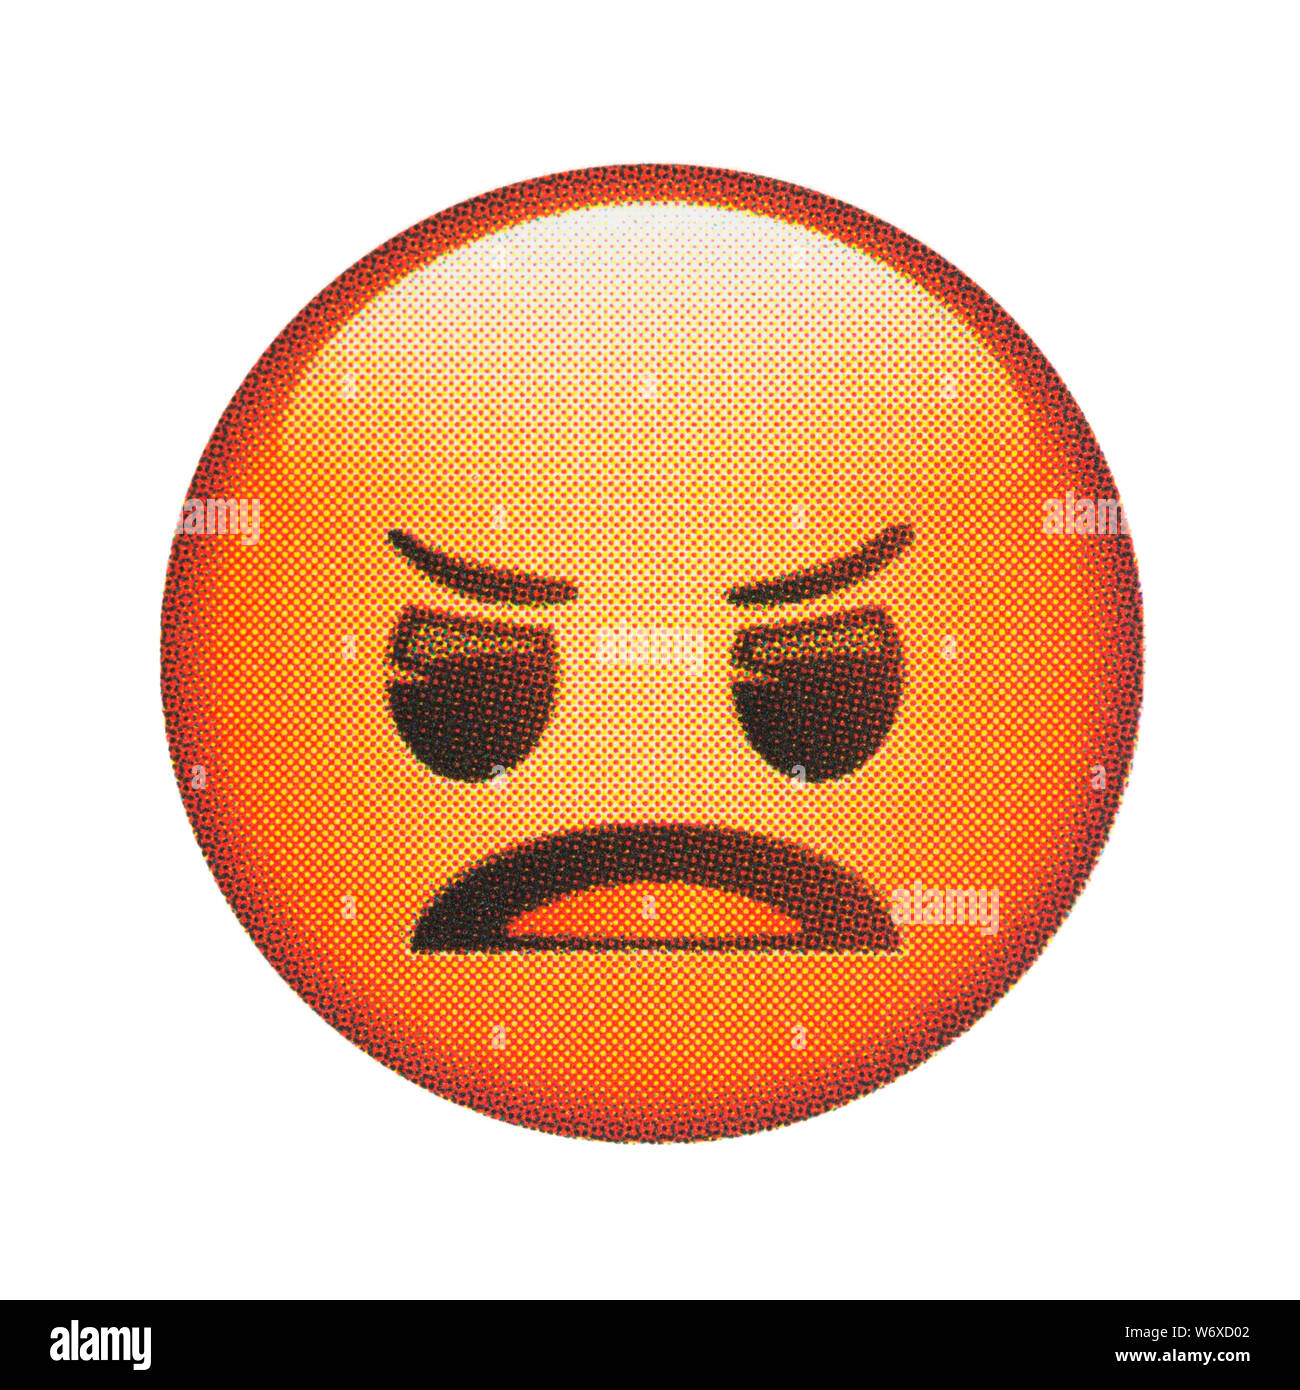 Angry face Cut Out Stock Images & Pictures - Alamy